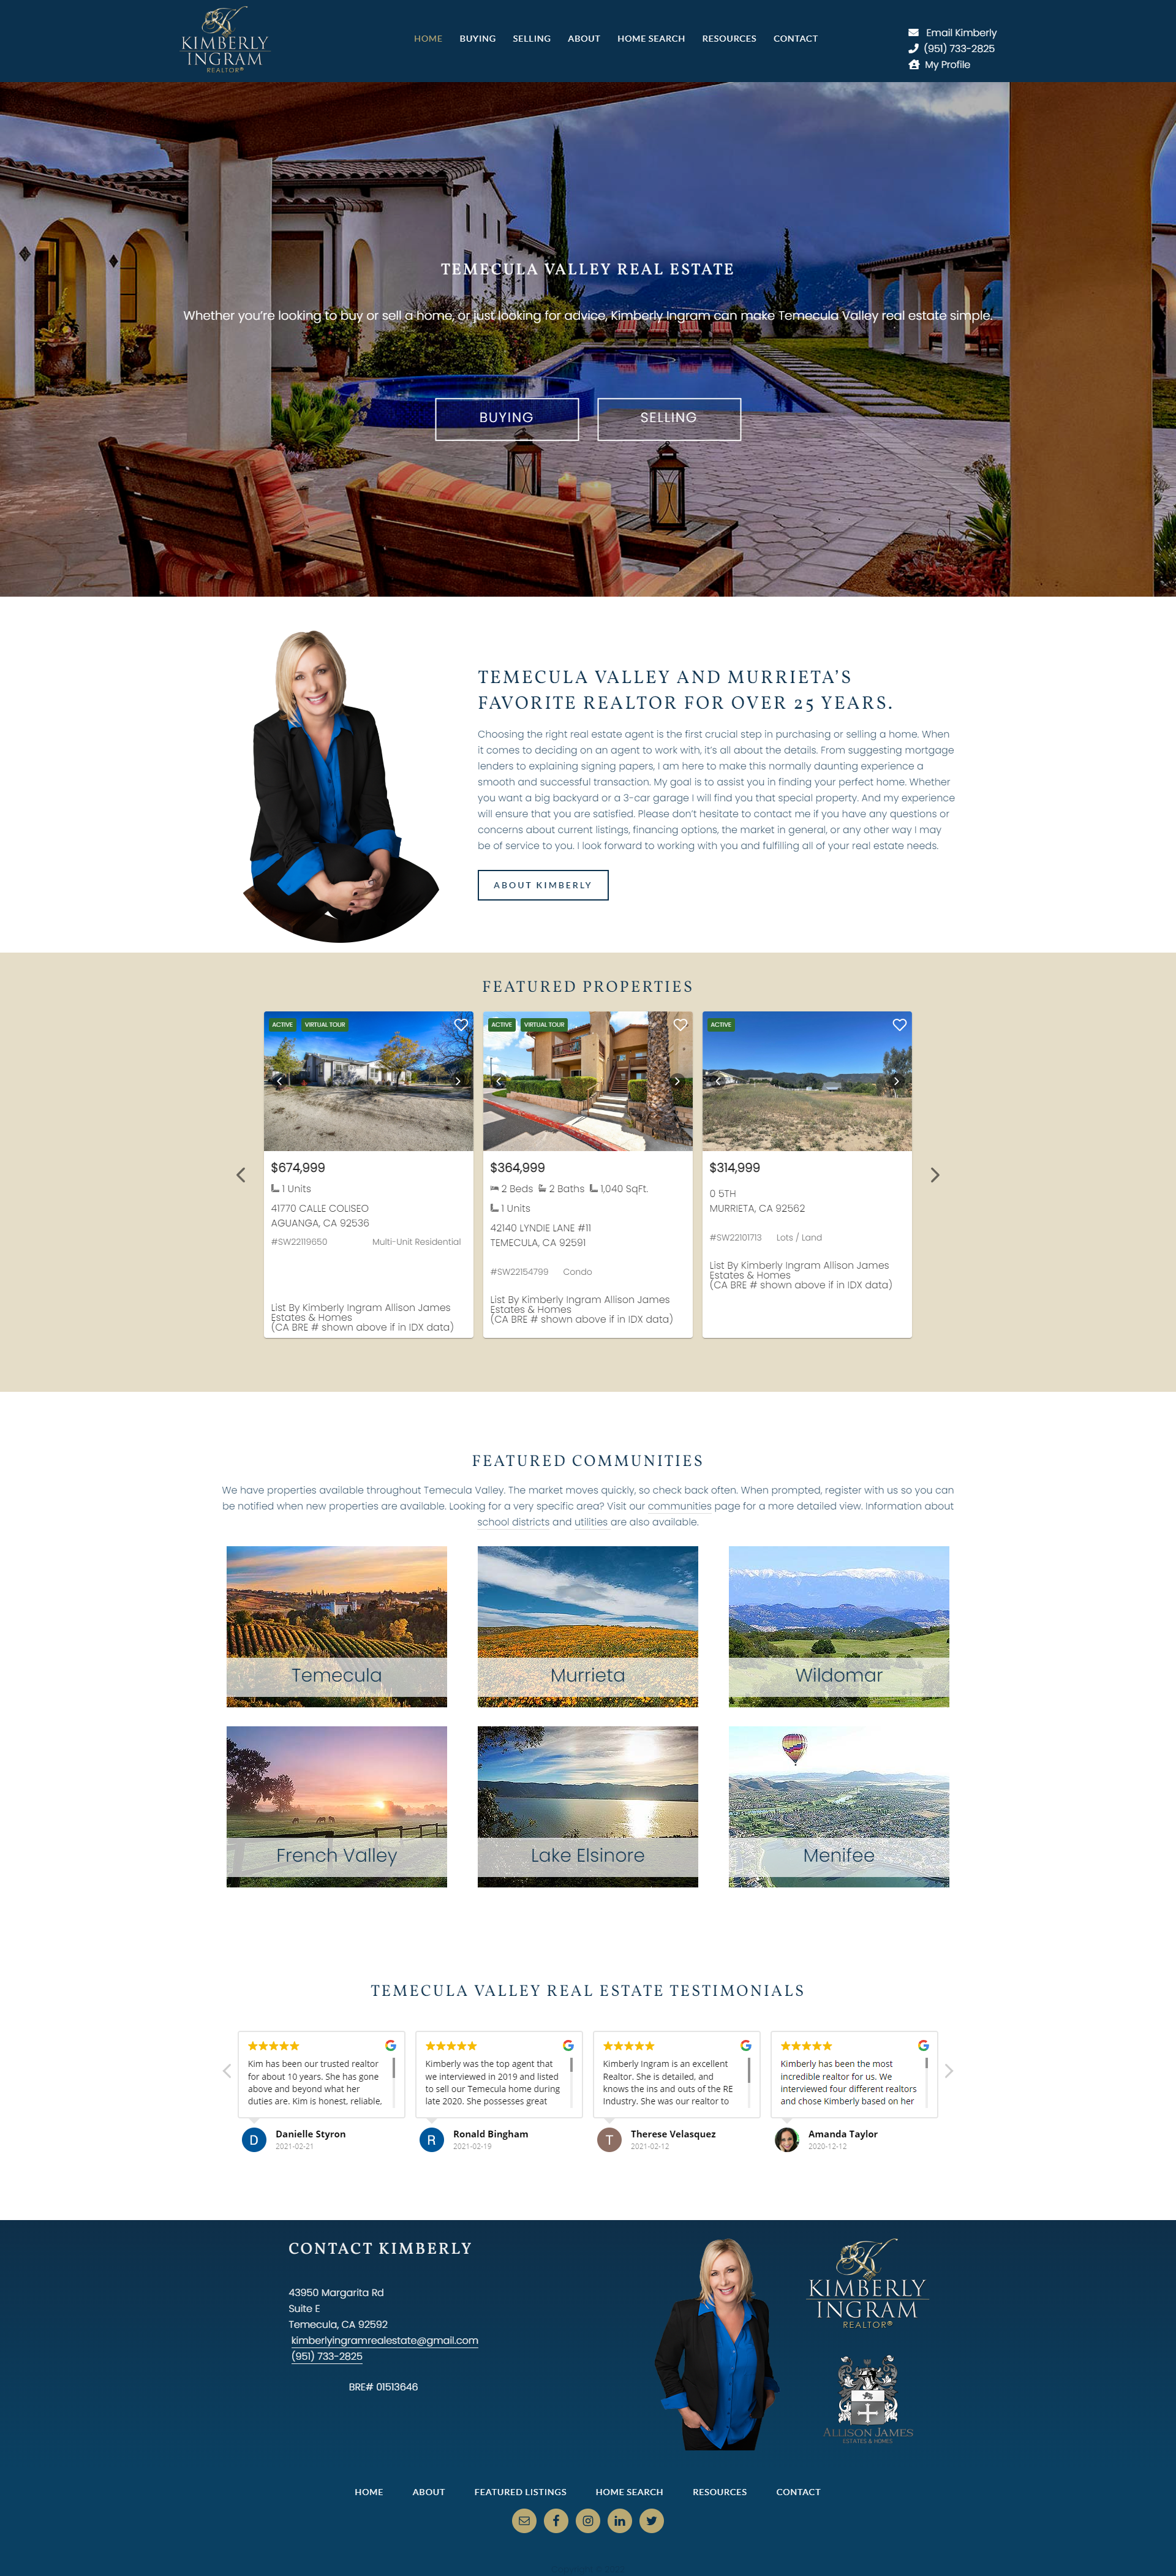 temeculavalleyrealestate.com, designed by SuCoWeb